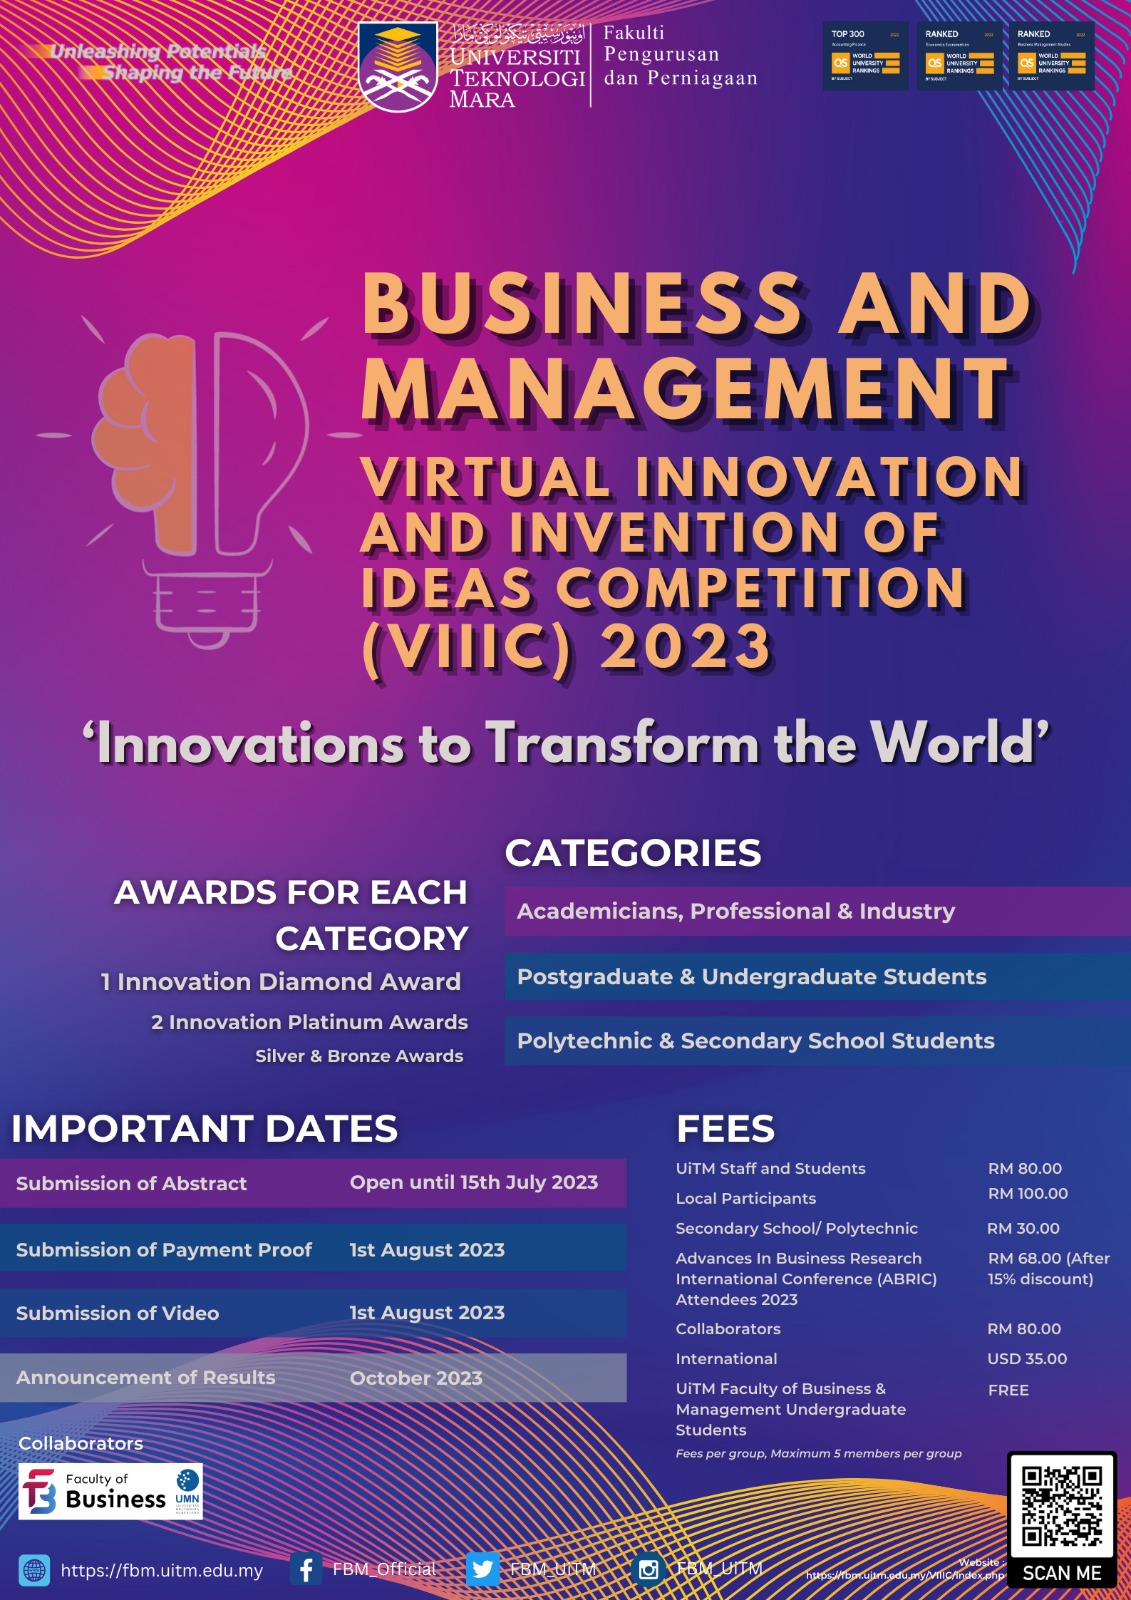 BUSINESS AND MANAGEMENT VIRTUAL INNOVATION AND INVENTION OF IDEAS COMPETITION (VIIIC) 2023